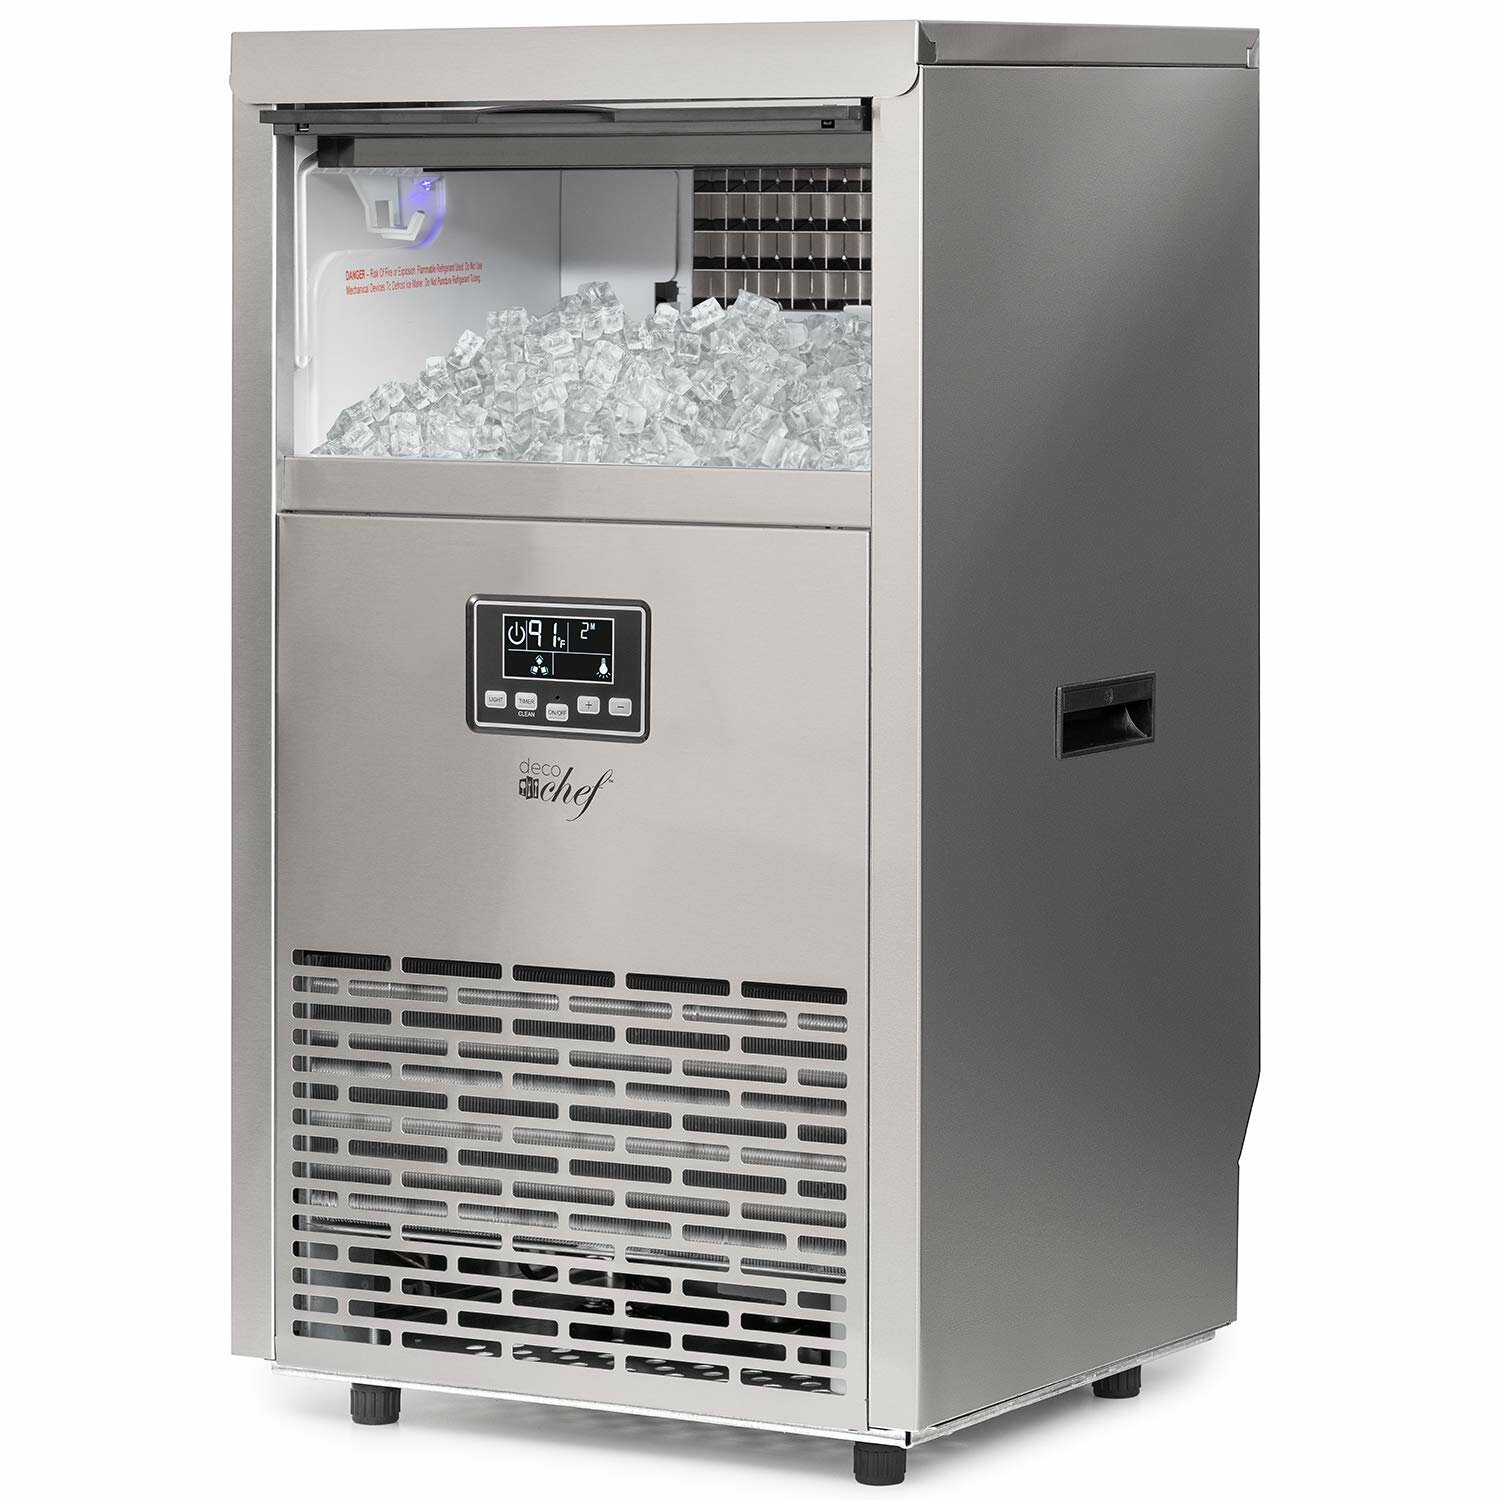 Flake Commercial Ice Machines For Sale - Ebay in Peoria Arizona